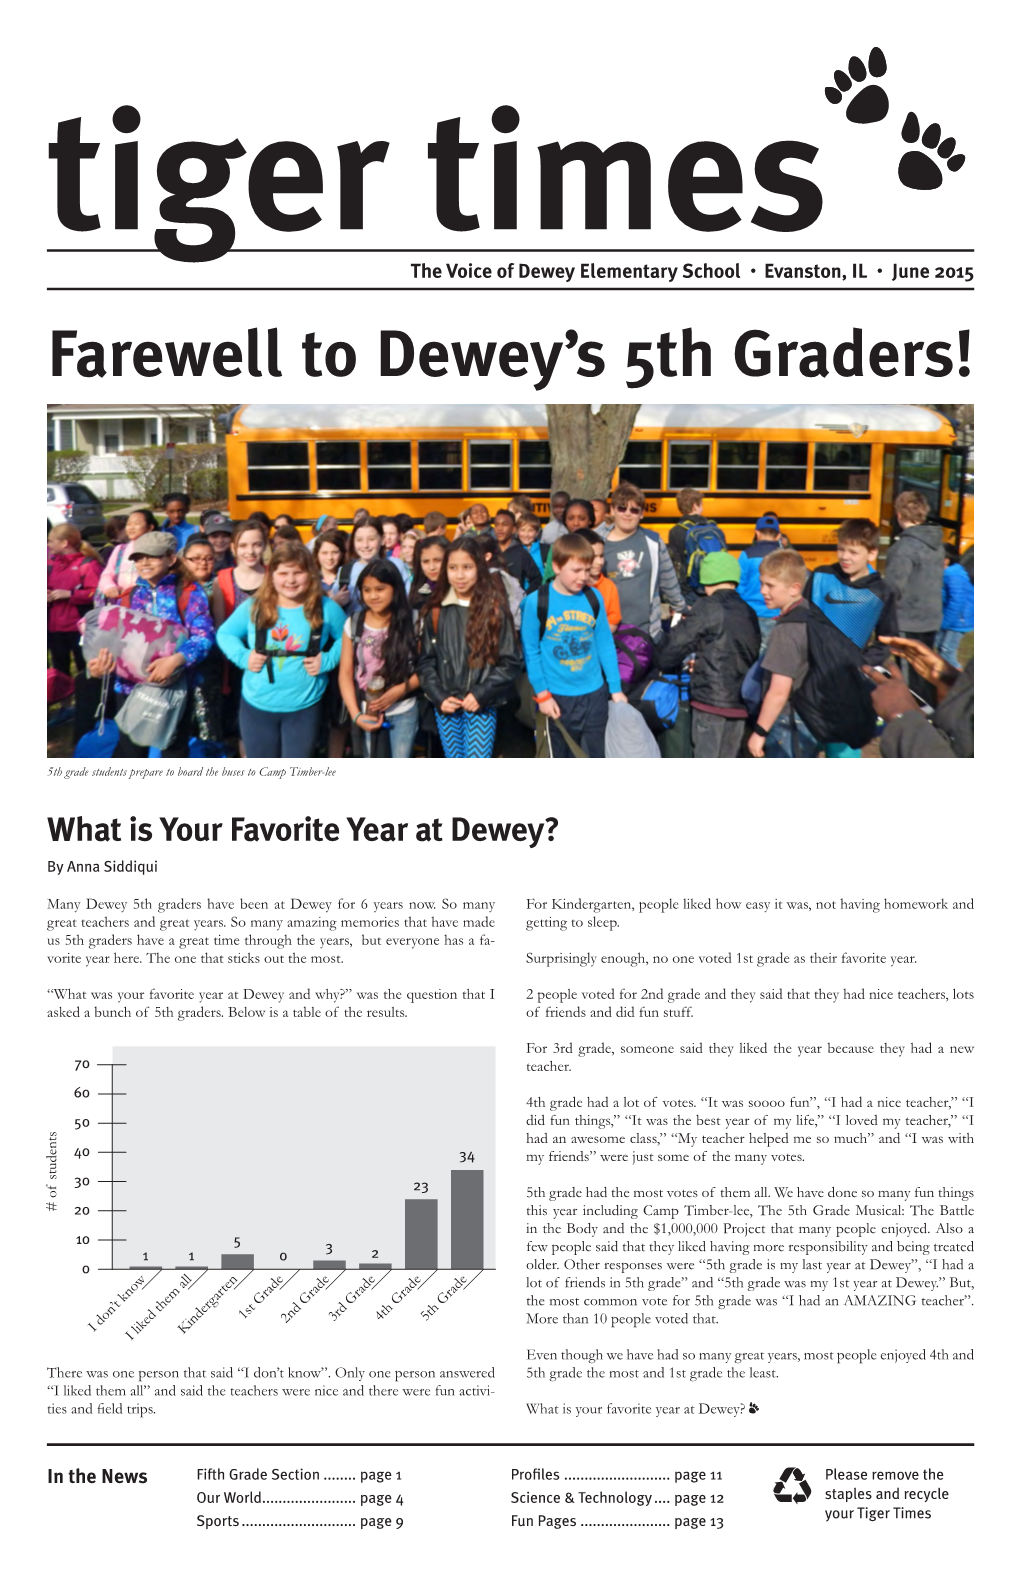 Farewell to Dewey's 5Th Graders!